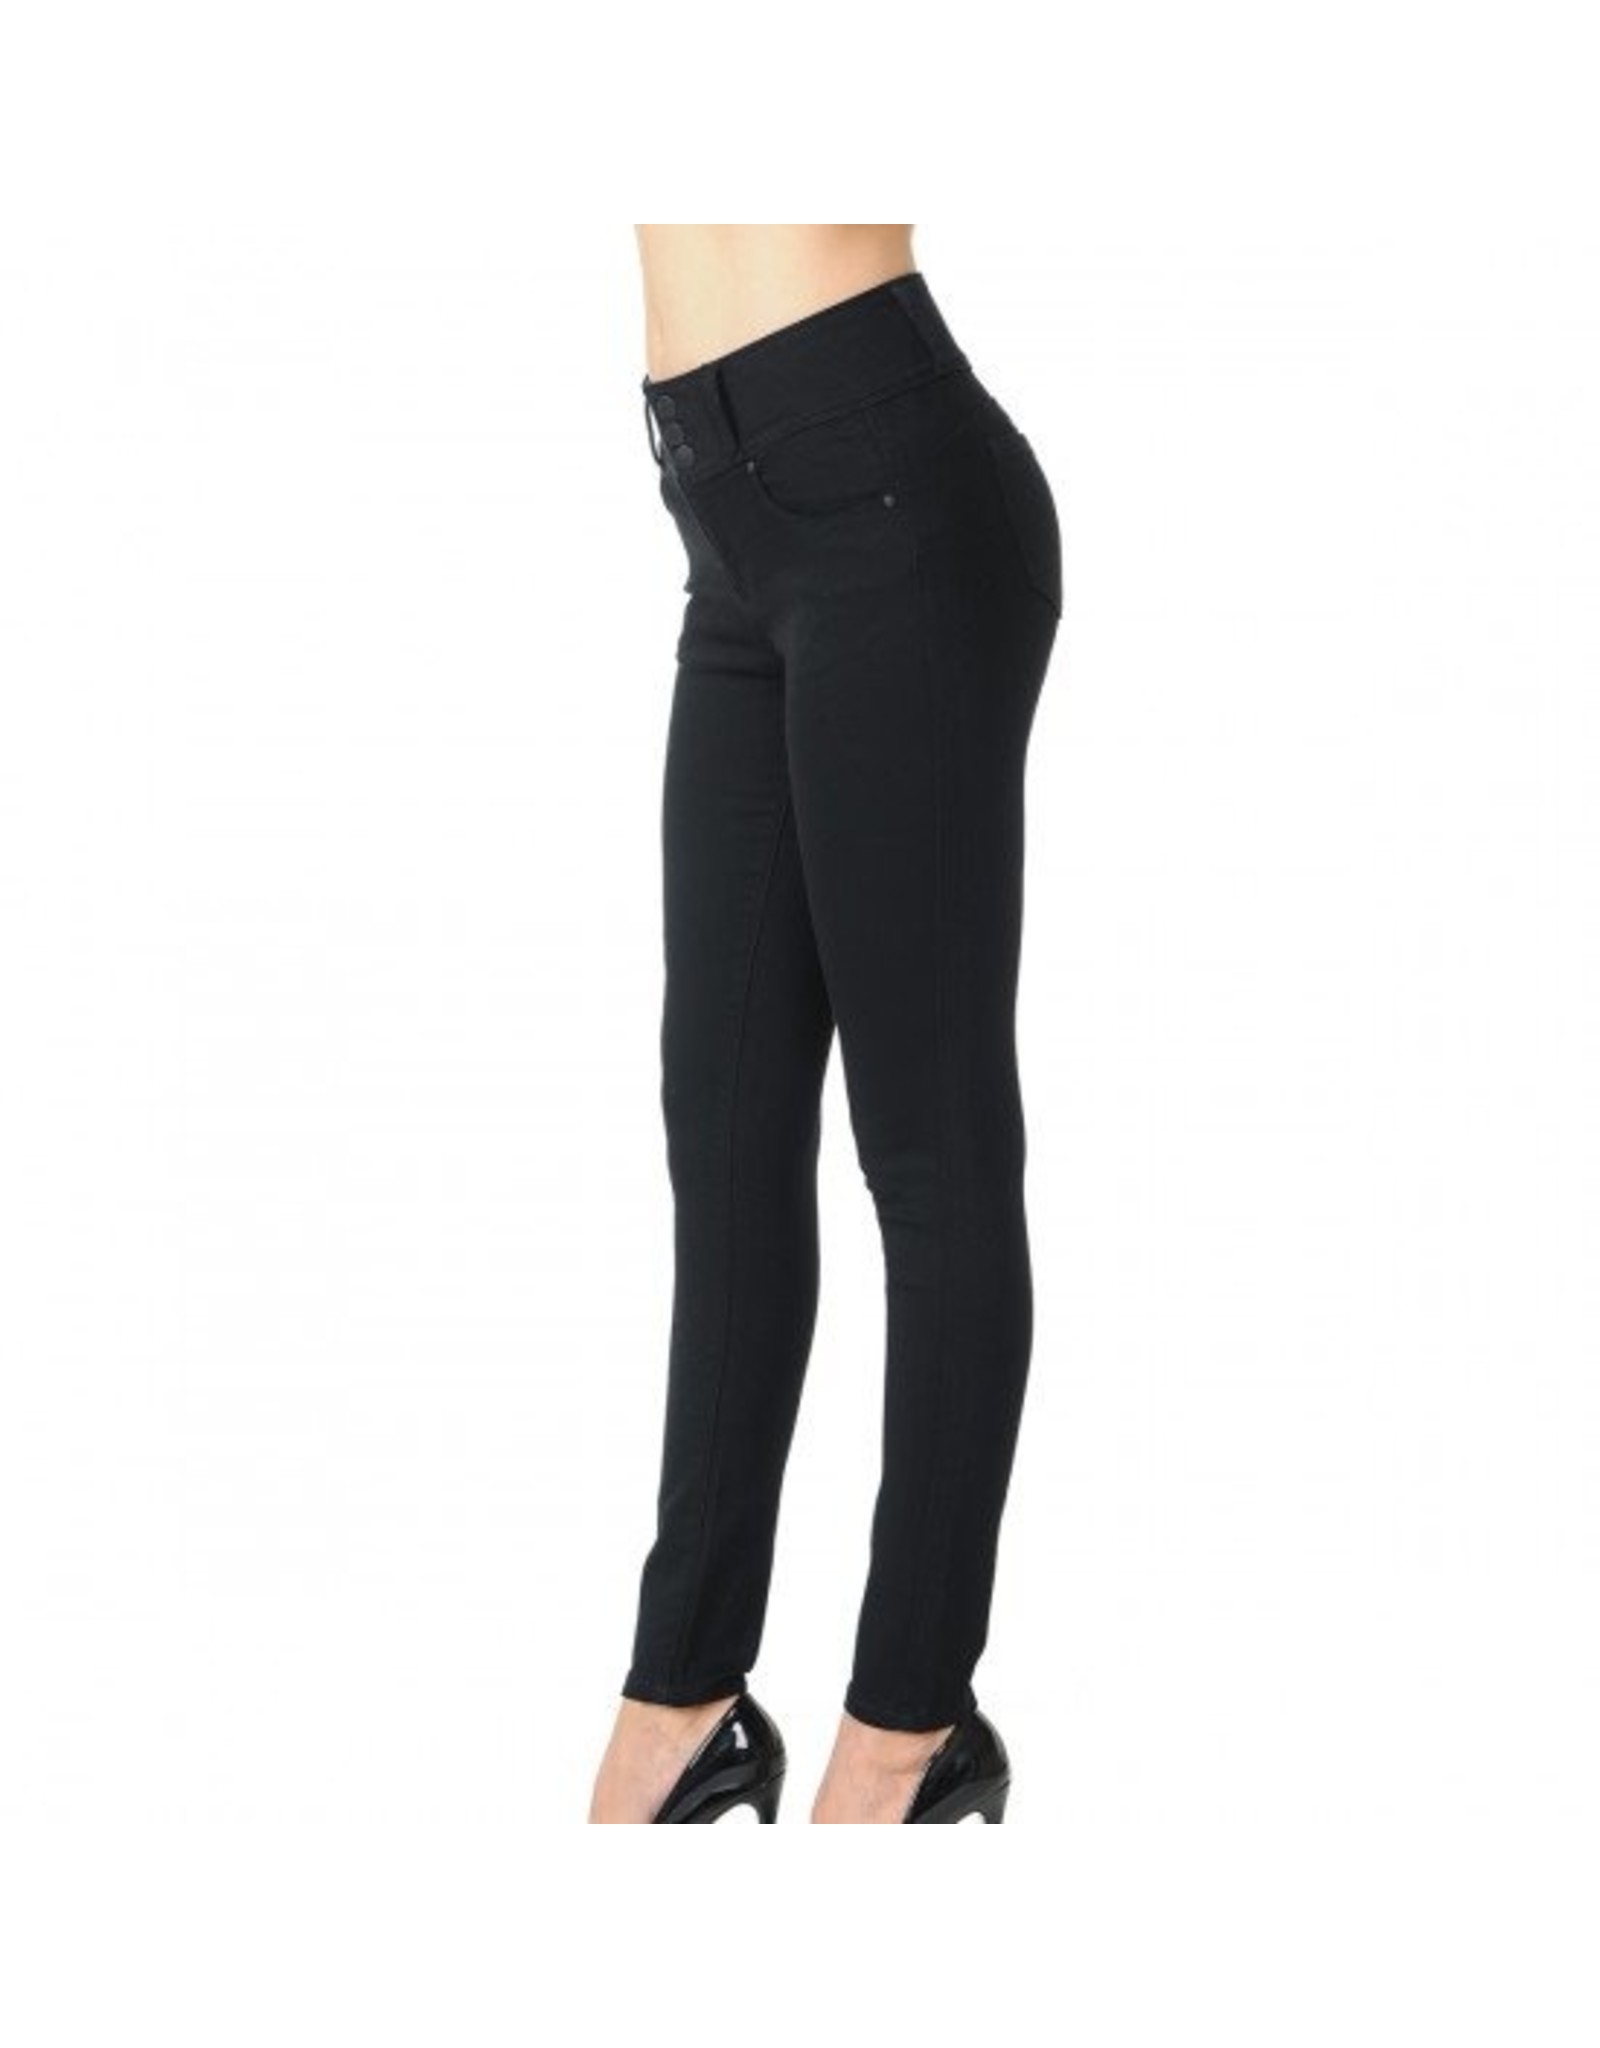 Wax Jeans - Women Push Up Super Comfy 3 Button Skinny - 90400